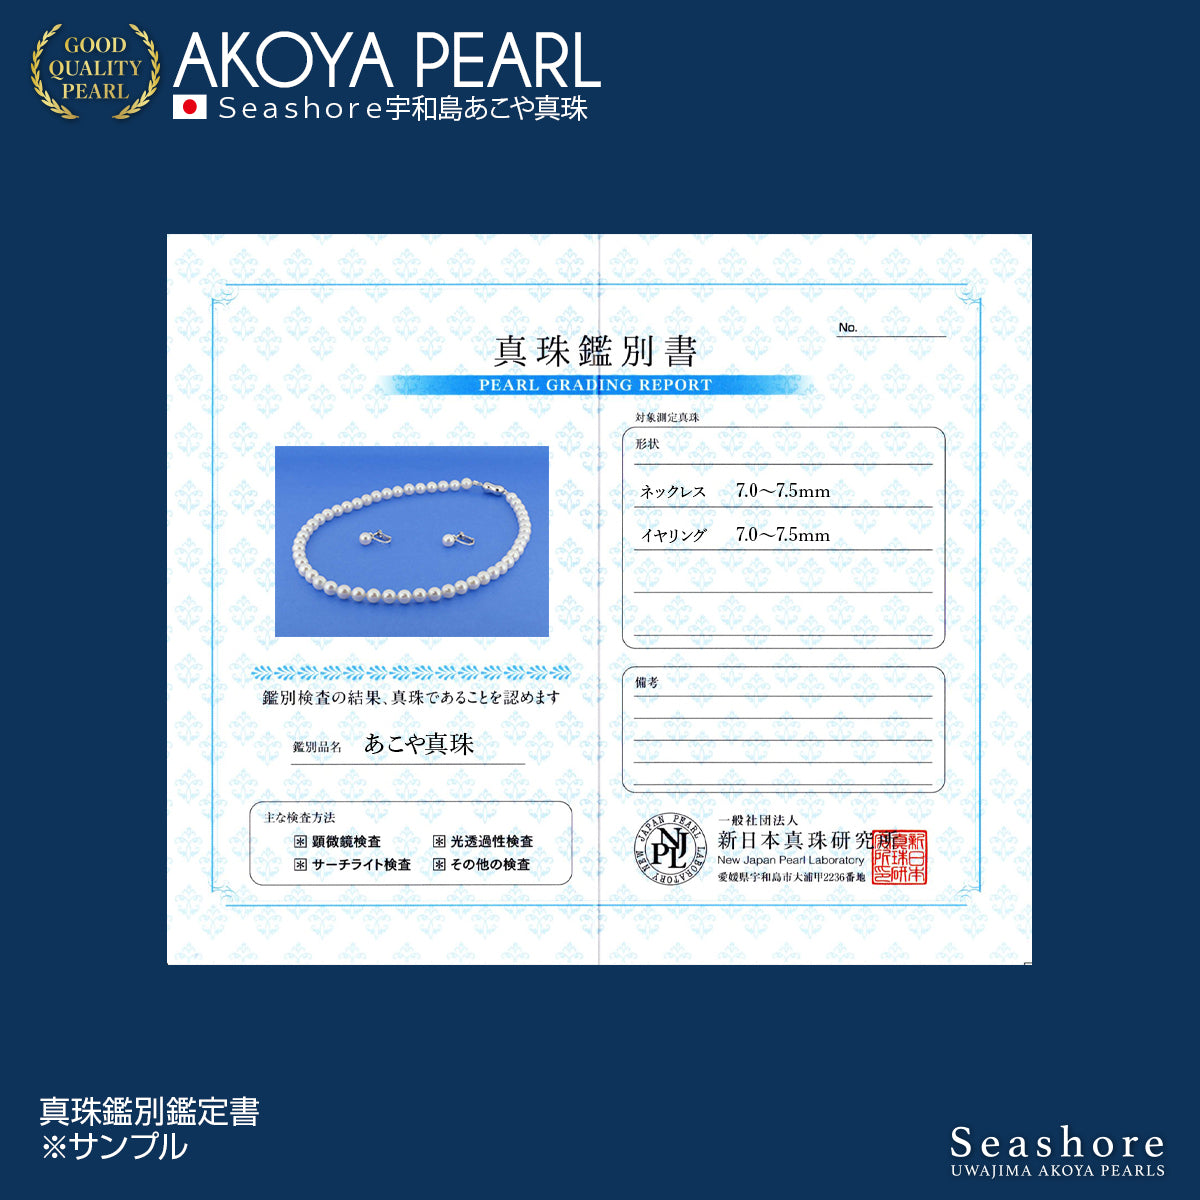 [Metal allergy compatible] Akoya pearl formal necklace 2-piece set [7.0-7.5mm] (Earrings/Non-pierced earrings) Formal set with certificate of authenticity and storage case